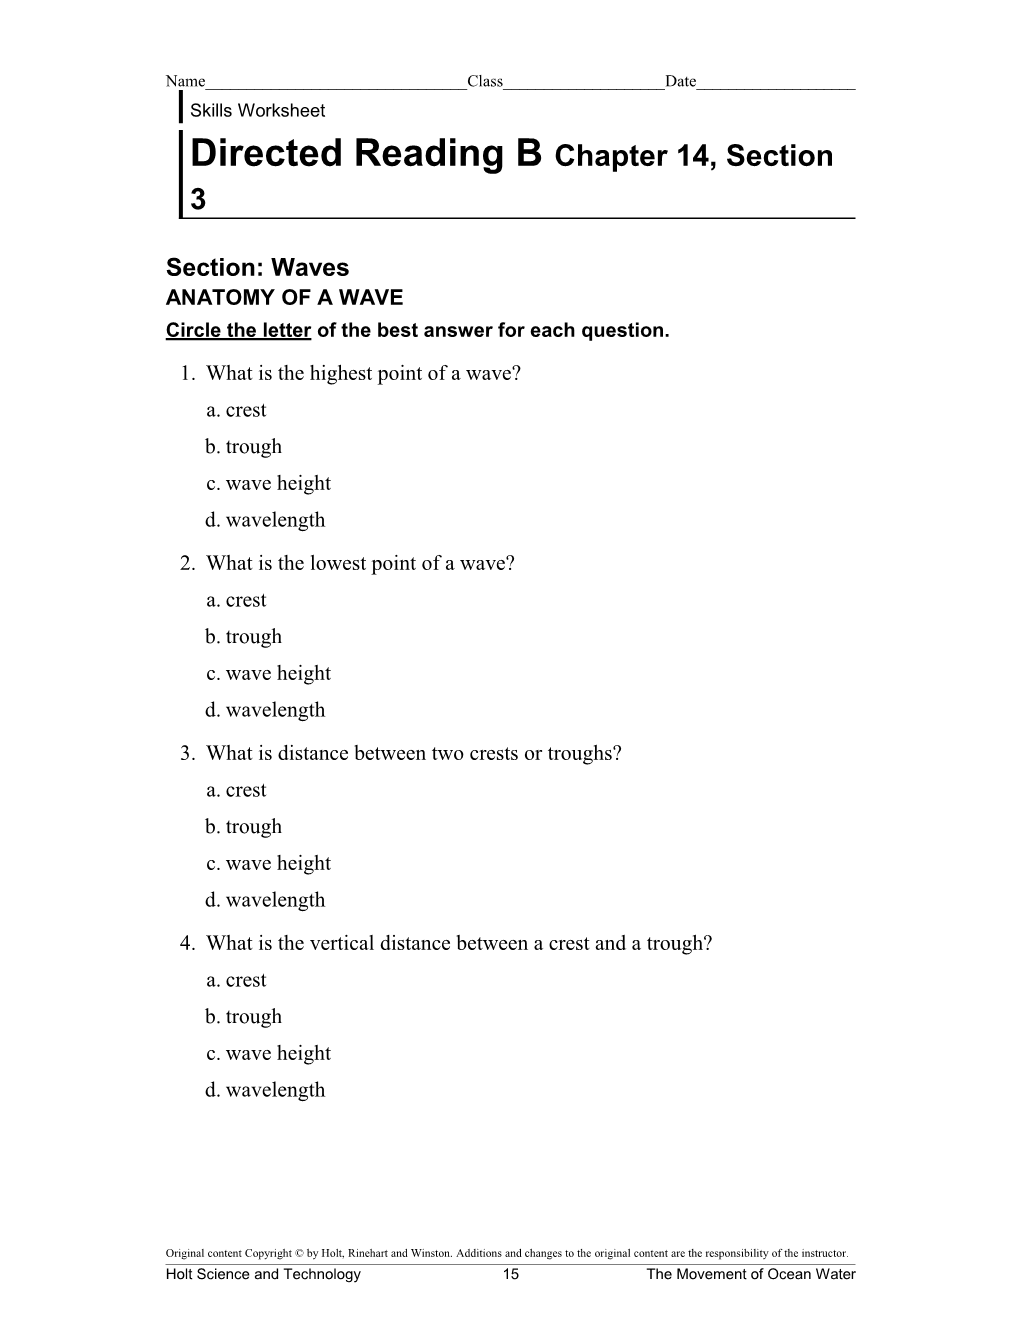 Directed Reading Bchapter 14, Section 3